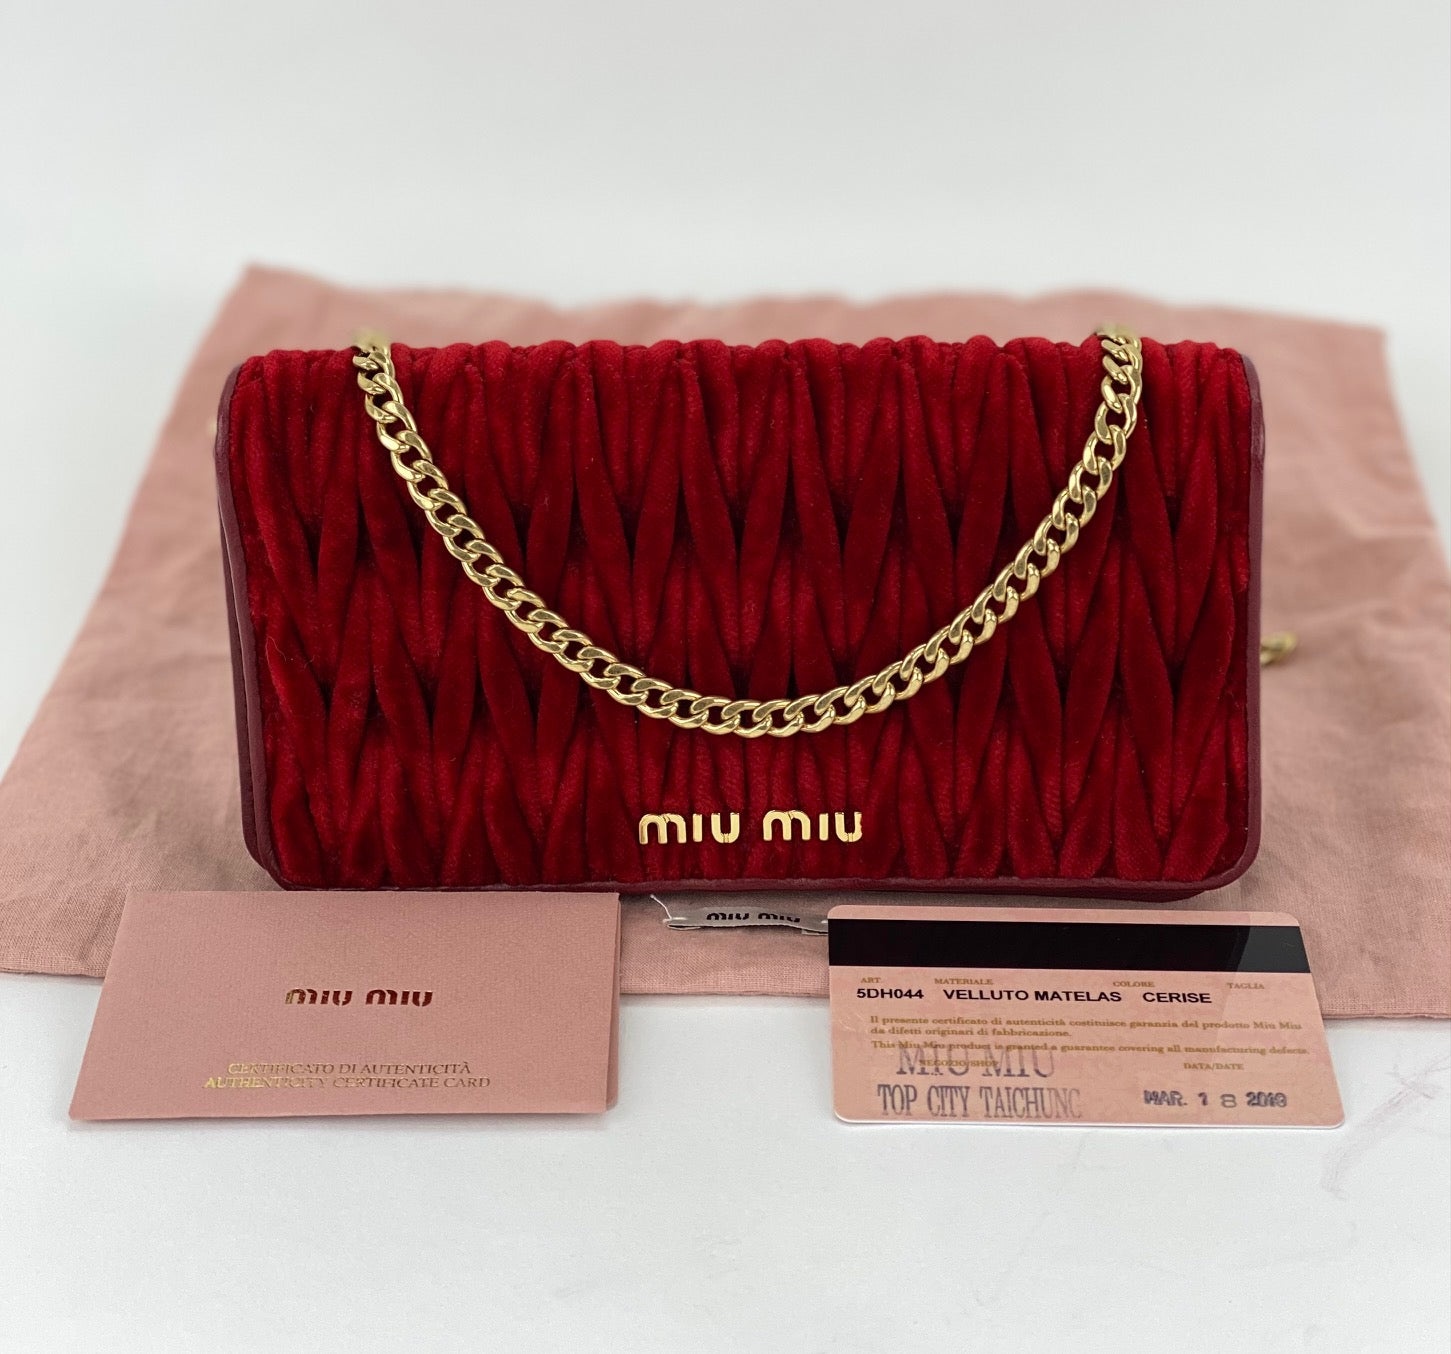 Louis Vuitton Red PVC Exterior Bags & Handbags for Women, Authenticity  Guaranteed